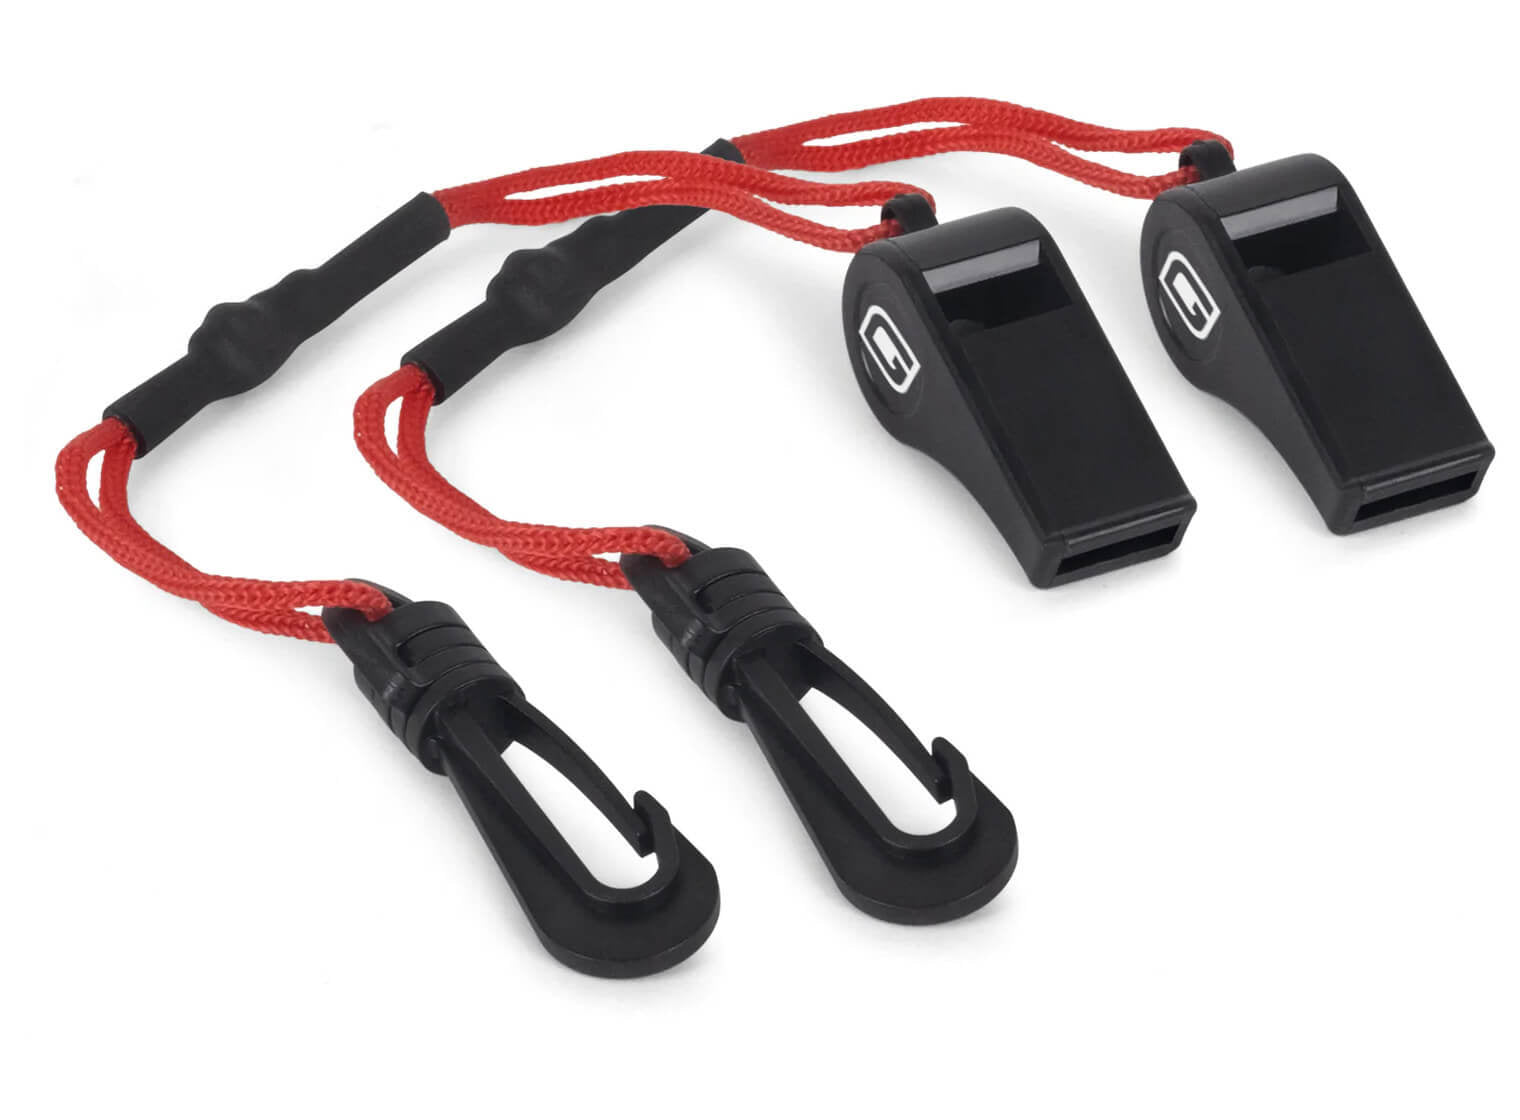 Paddle Board Emergency Whistle (2-Pack)